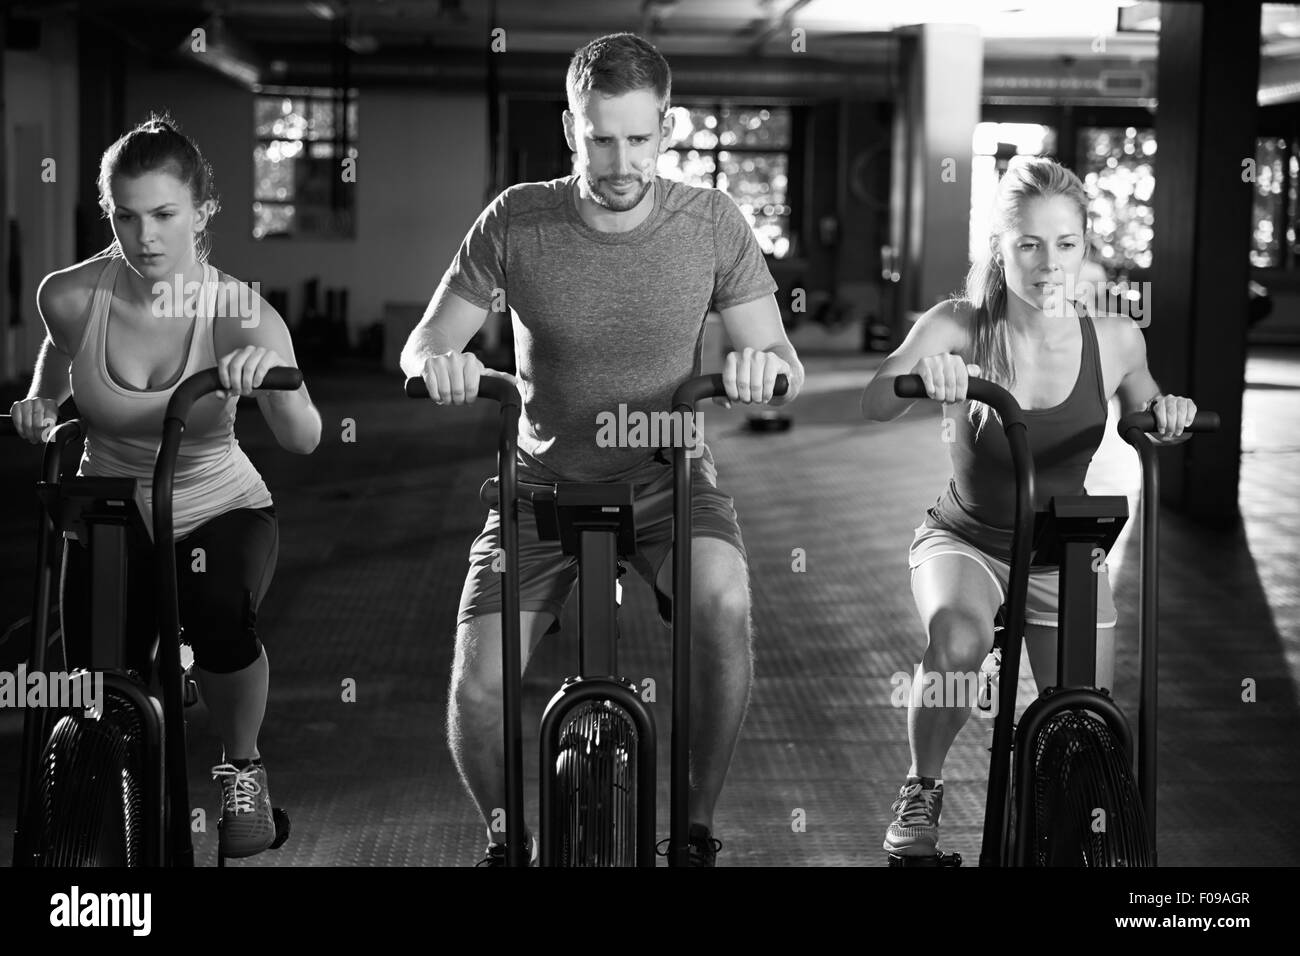 Black And White Shot Of Gym Class Using Cross Trainers Stock Photo